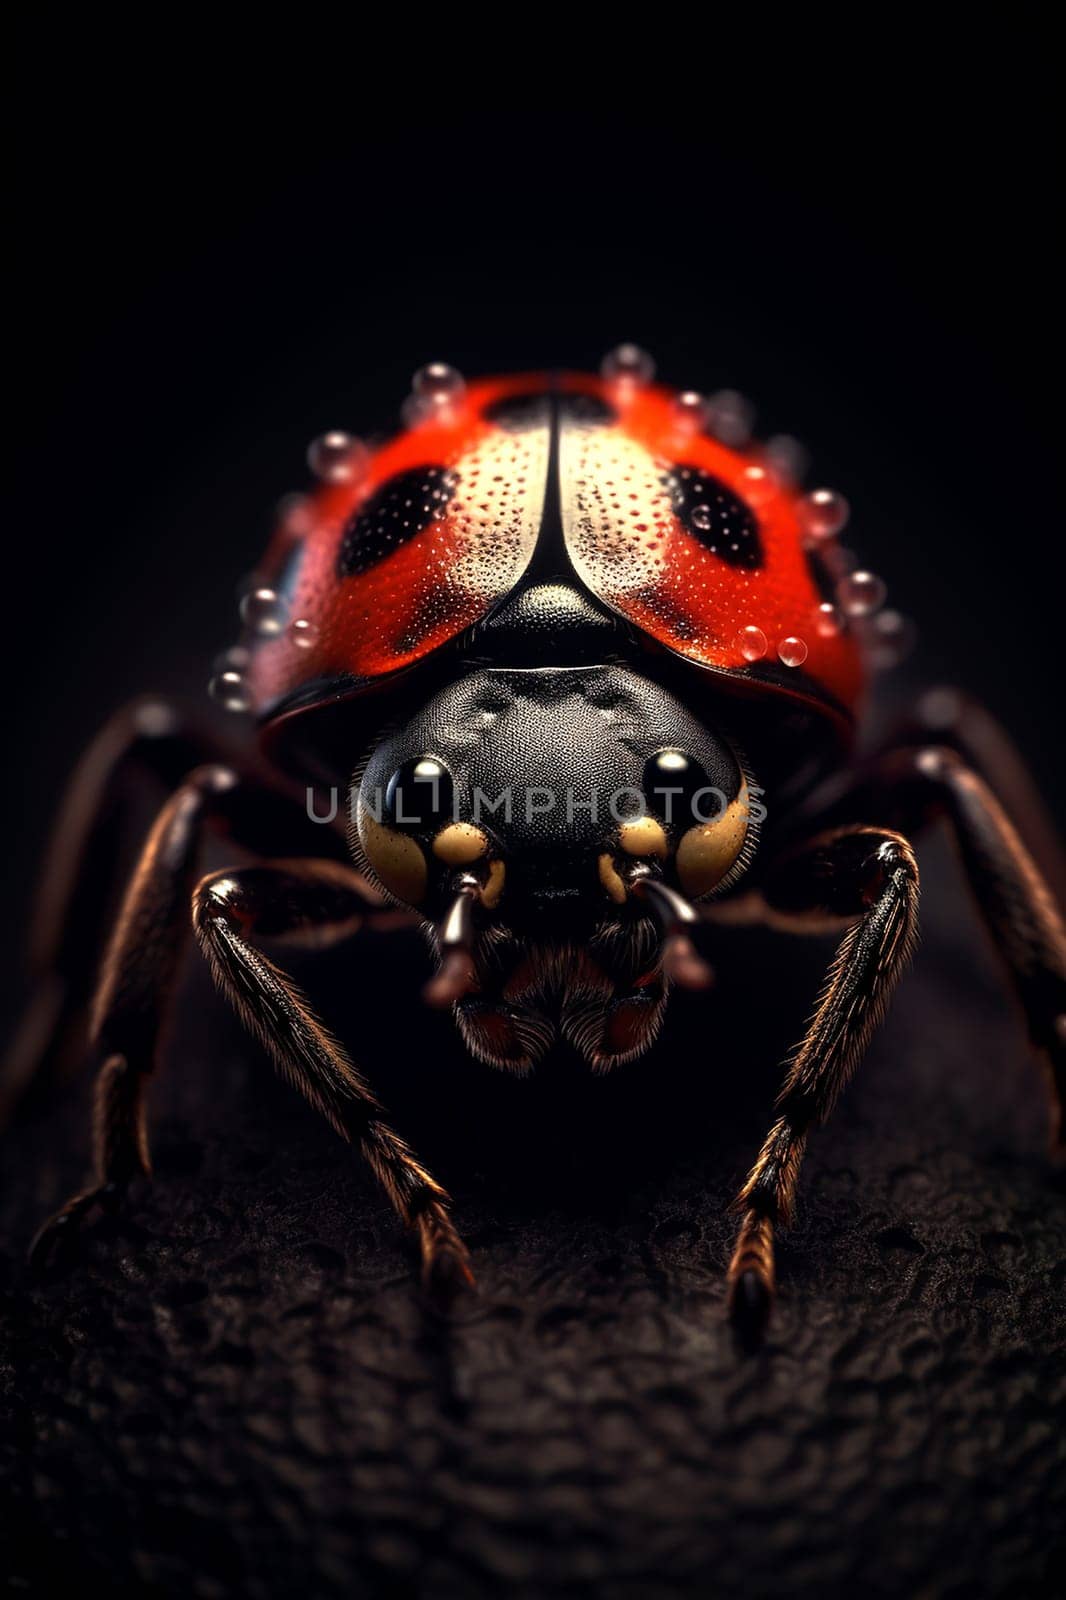 A close-up photo of a ladybug insect with black background, red and black insect